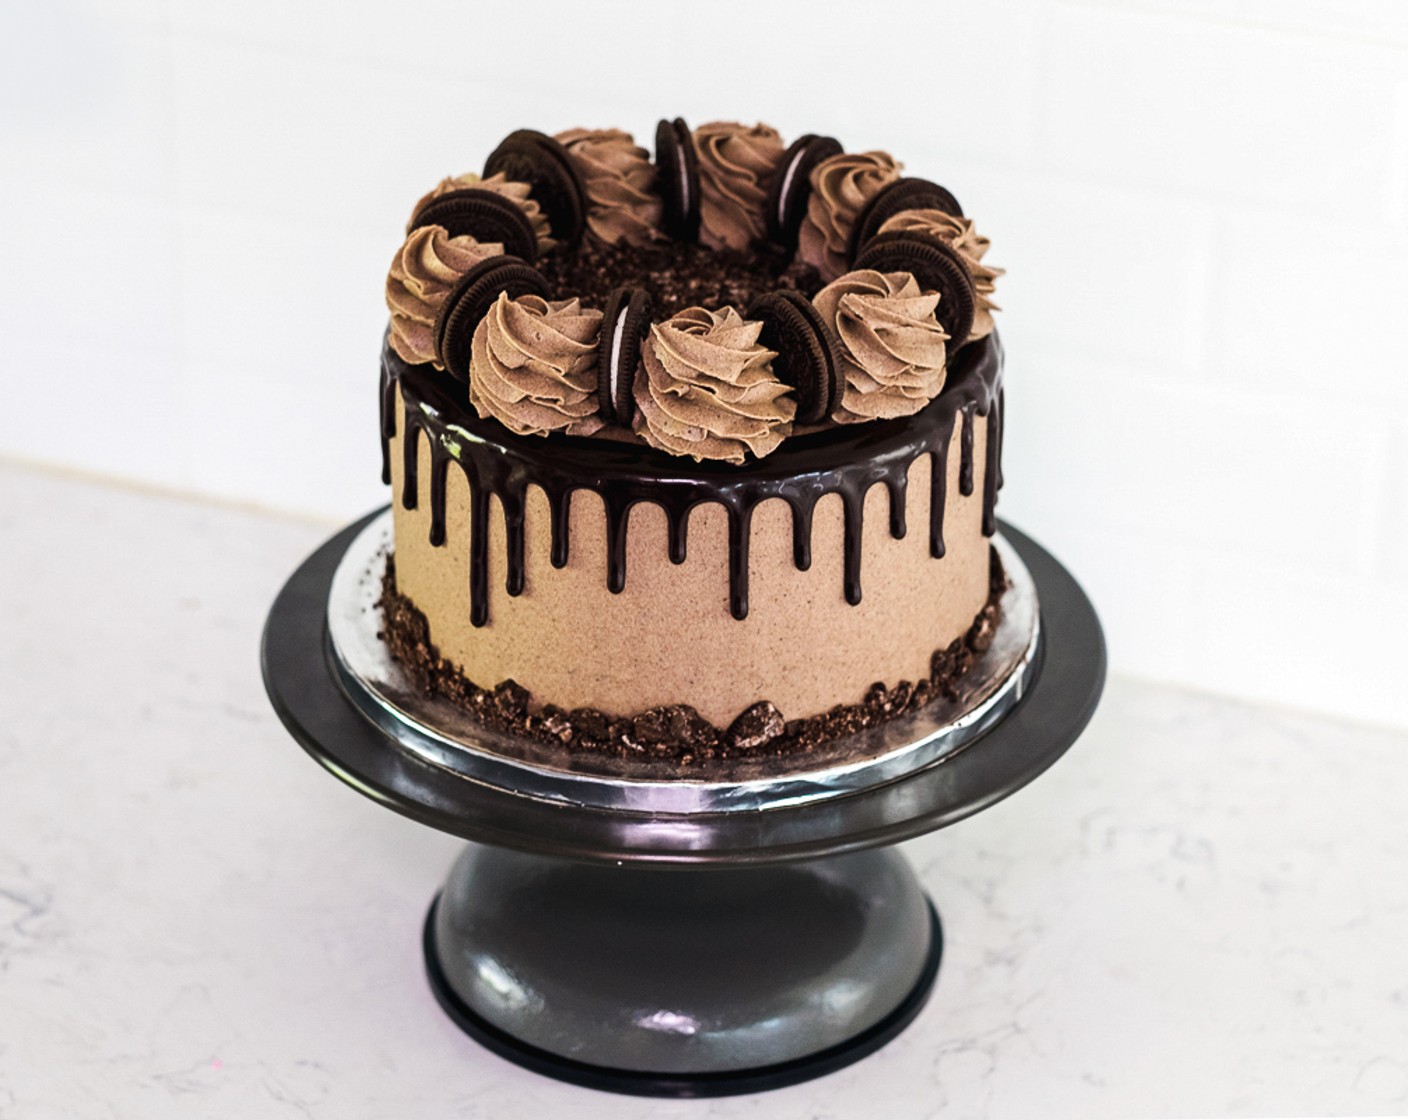 Cookies and Cream Cake with Chocolate Drip